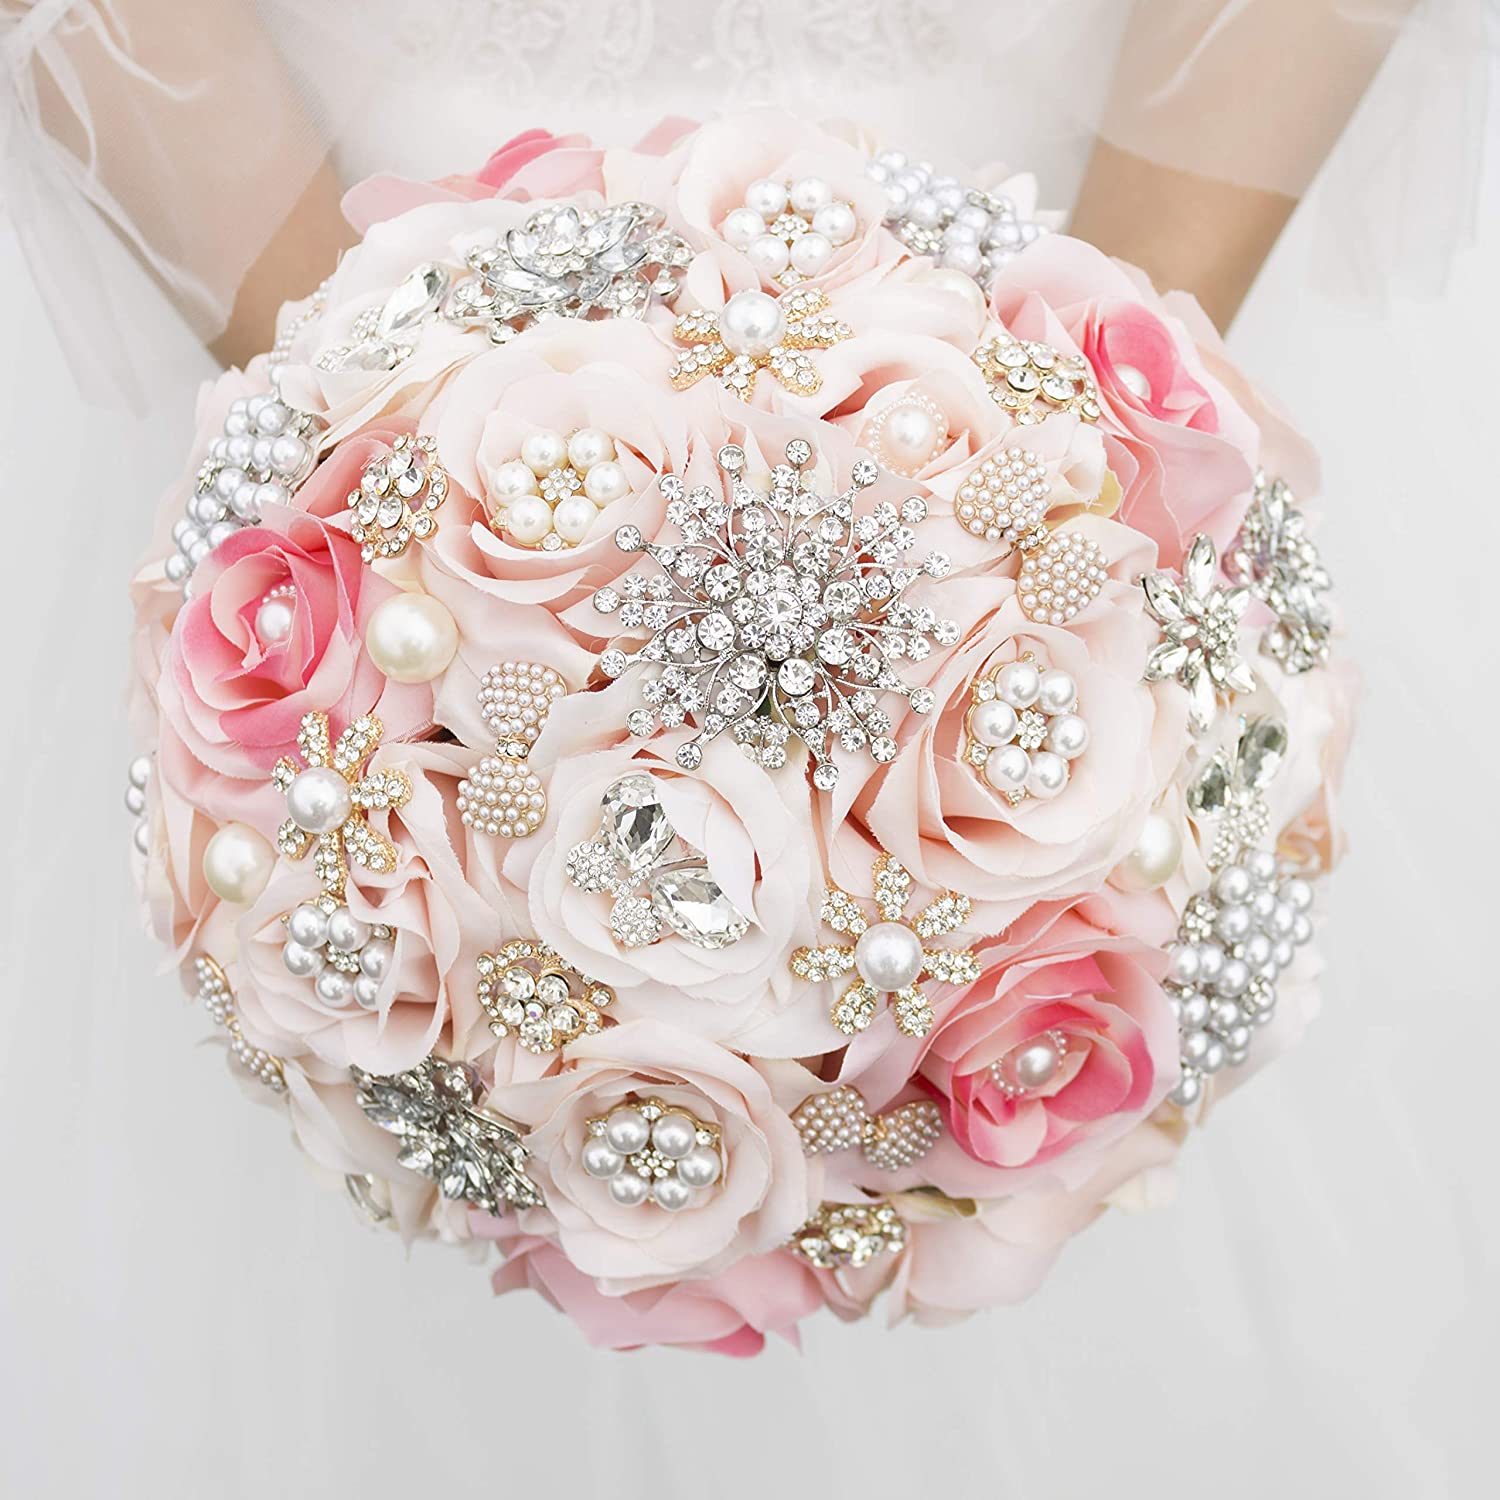 Abbie Home Brooch Jewelry Bouquet - Luxury Bridal Bouquets with Crystal Rhinestone Sparkle Pearls Rose Flowers for Wedding Quinceanera (Pink)